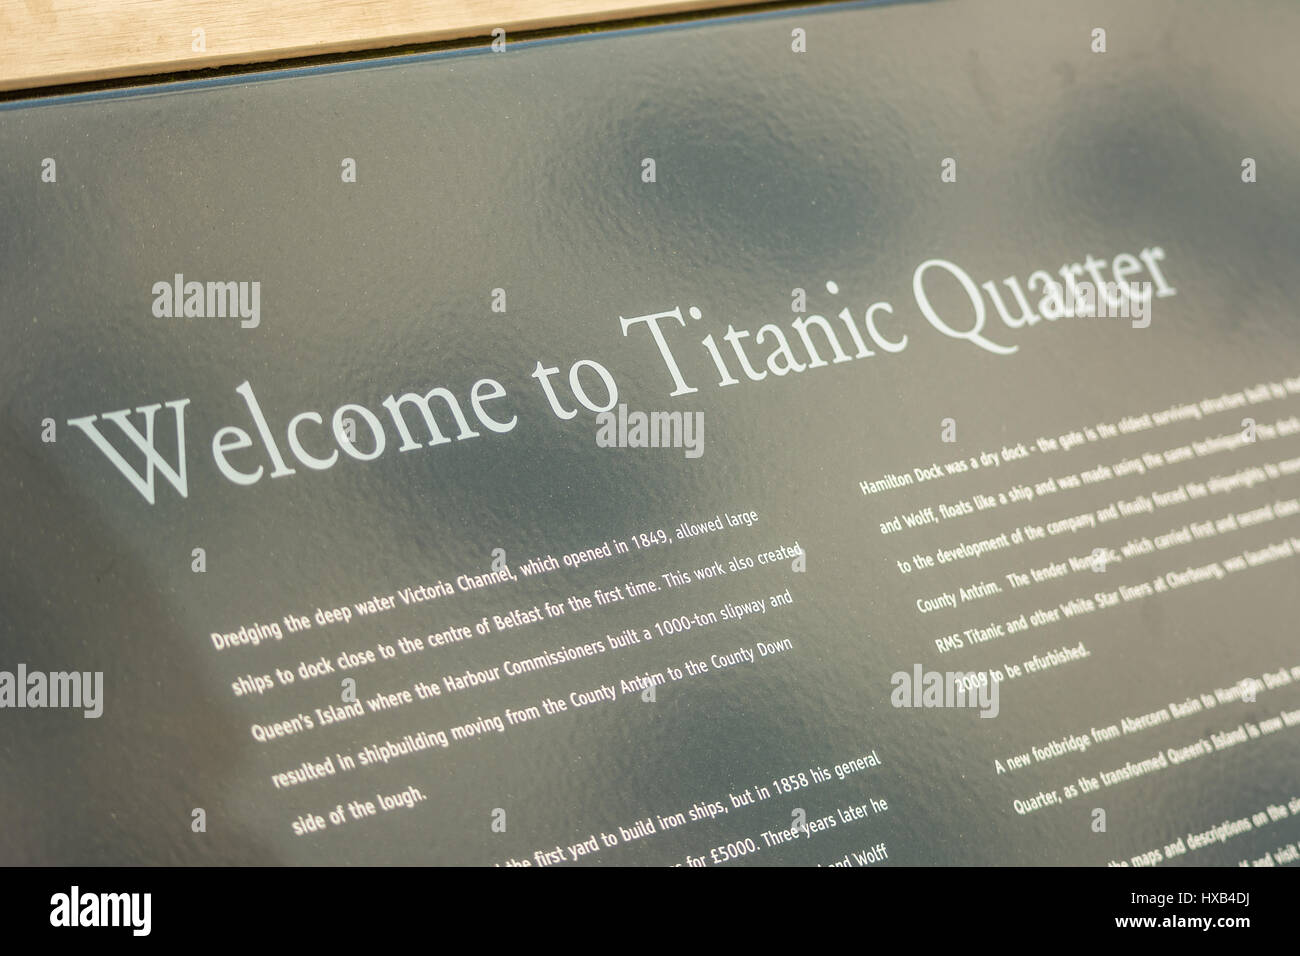 'Welcome to Titanic Quarter' sign. Stock Photo